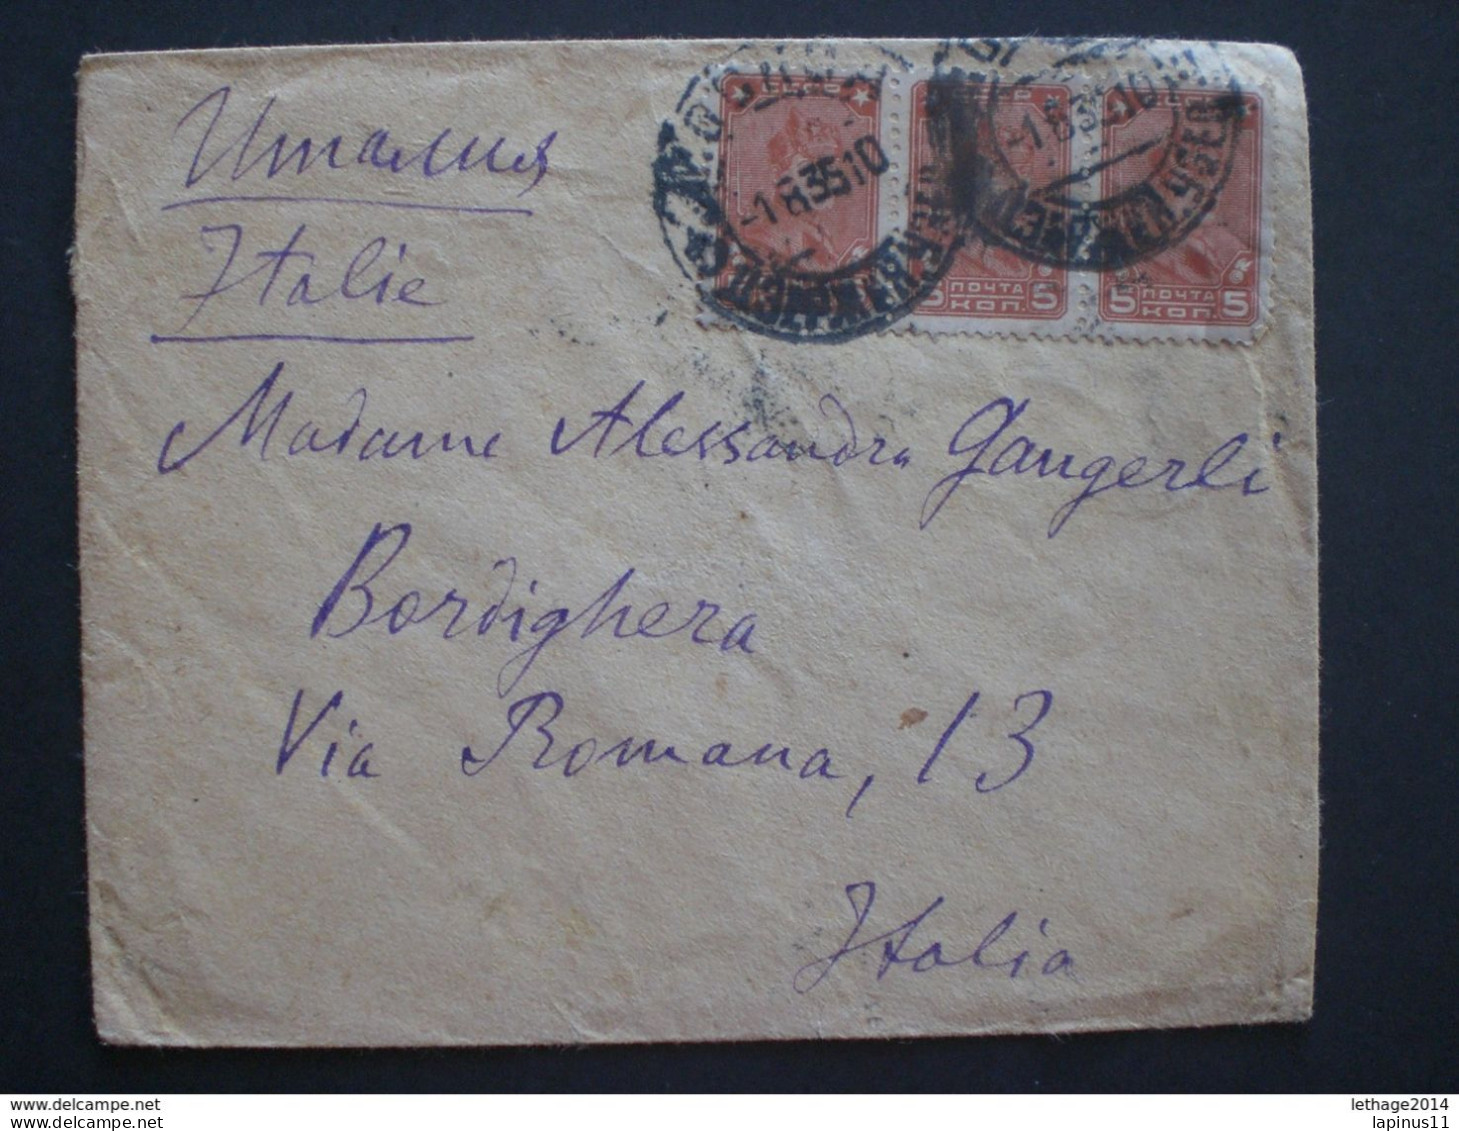 RUSSIA RUSSIE РОССИЯ STAMPS COVER 1935 Registered Mail RUSSIE TO ITALY RRR RIF.TAGG. (11) - Brieven En Documenten